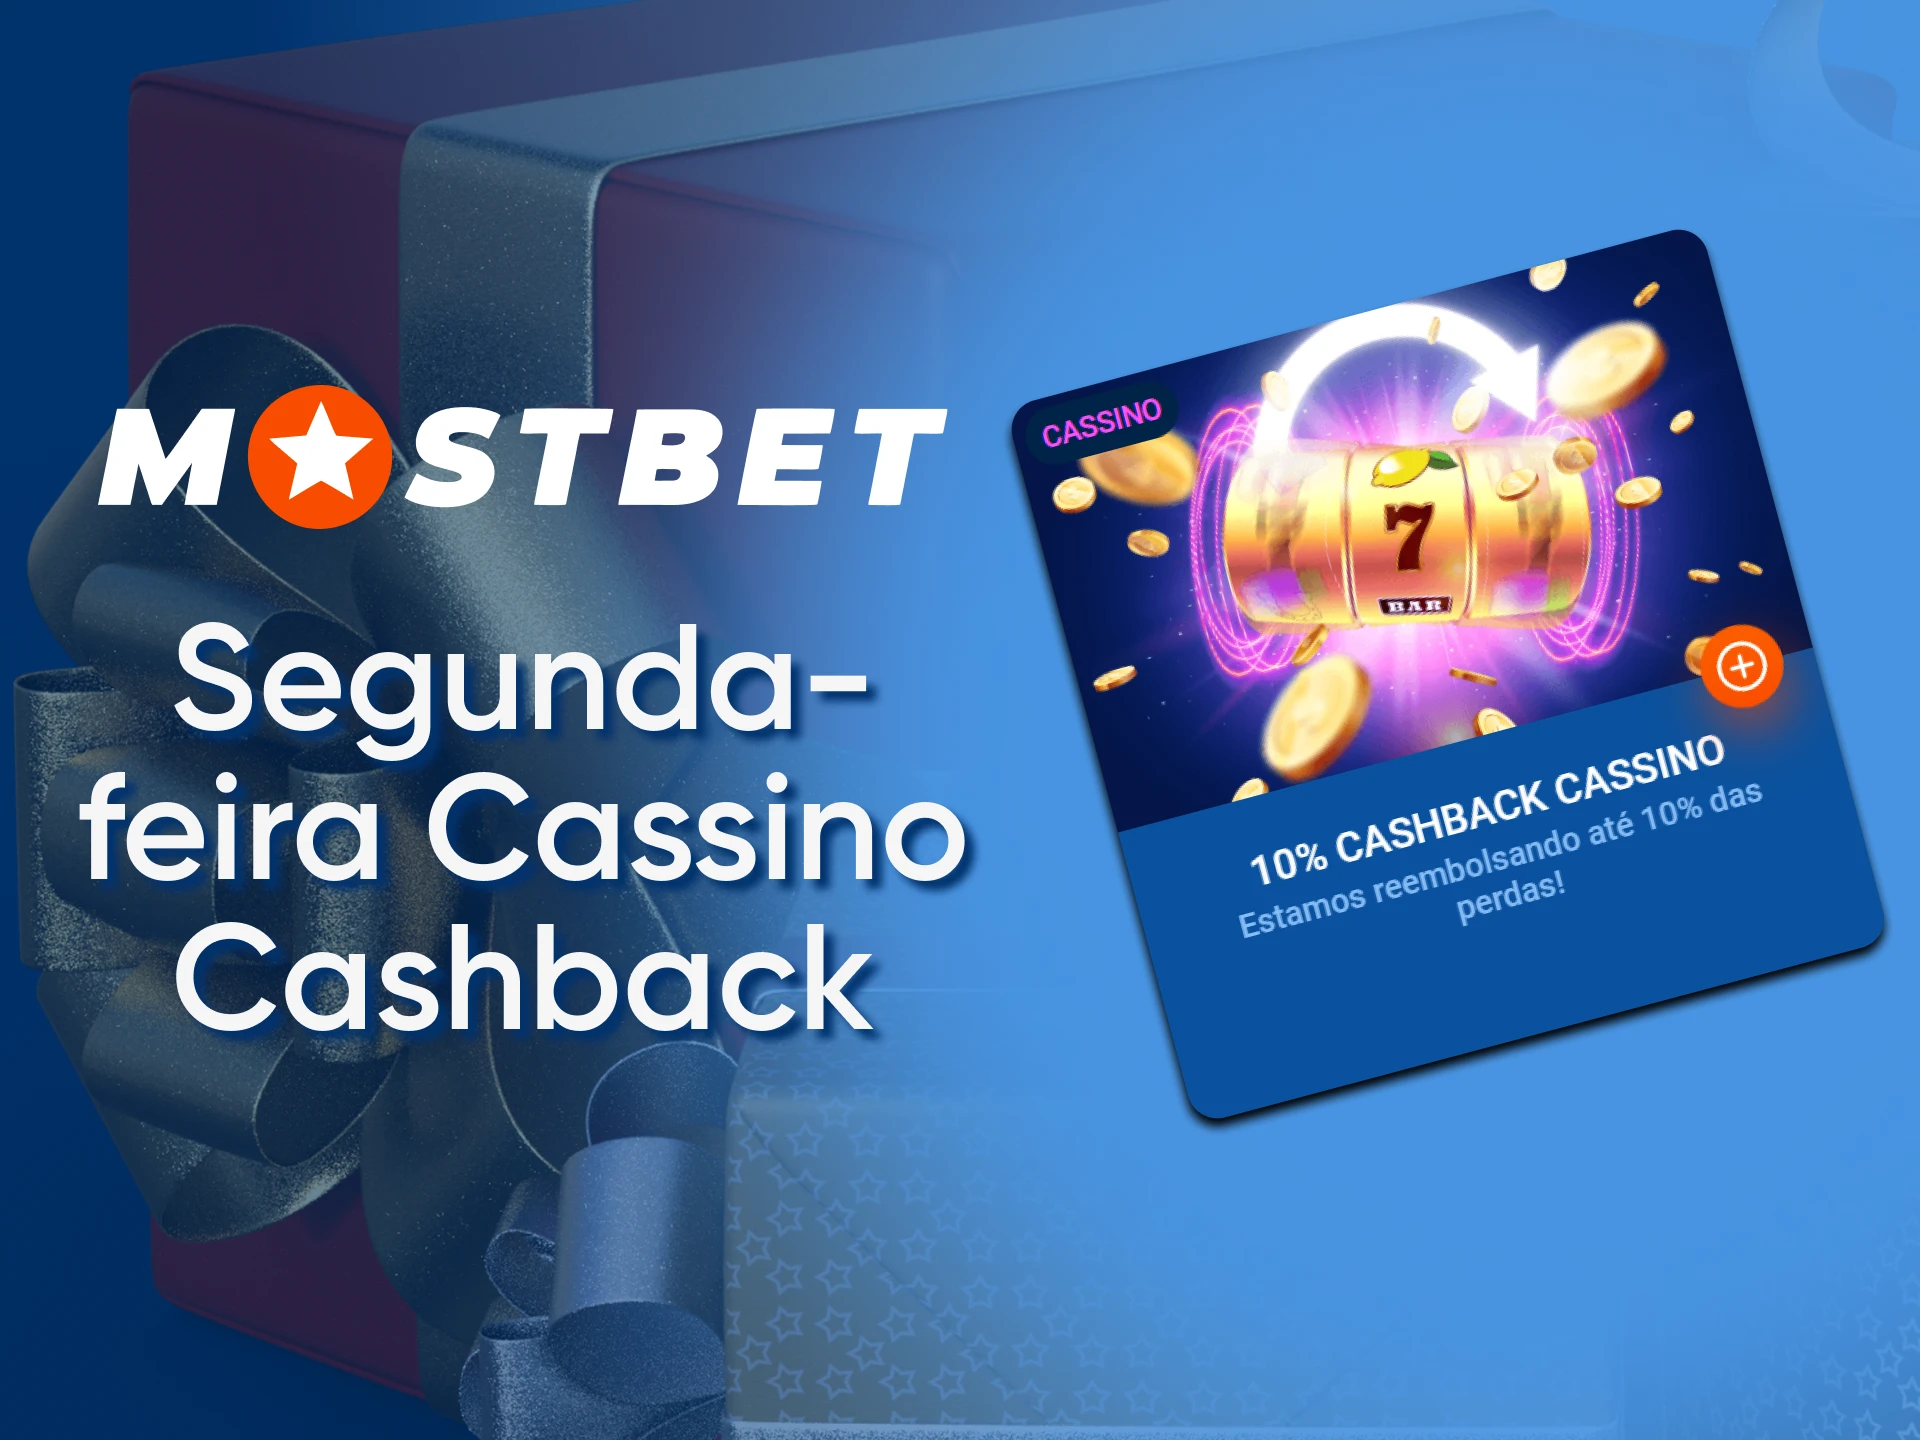 Play at Mostbet casino and earn money.